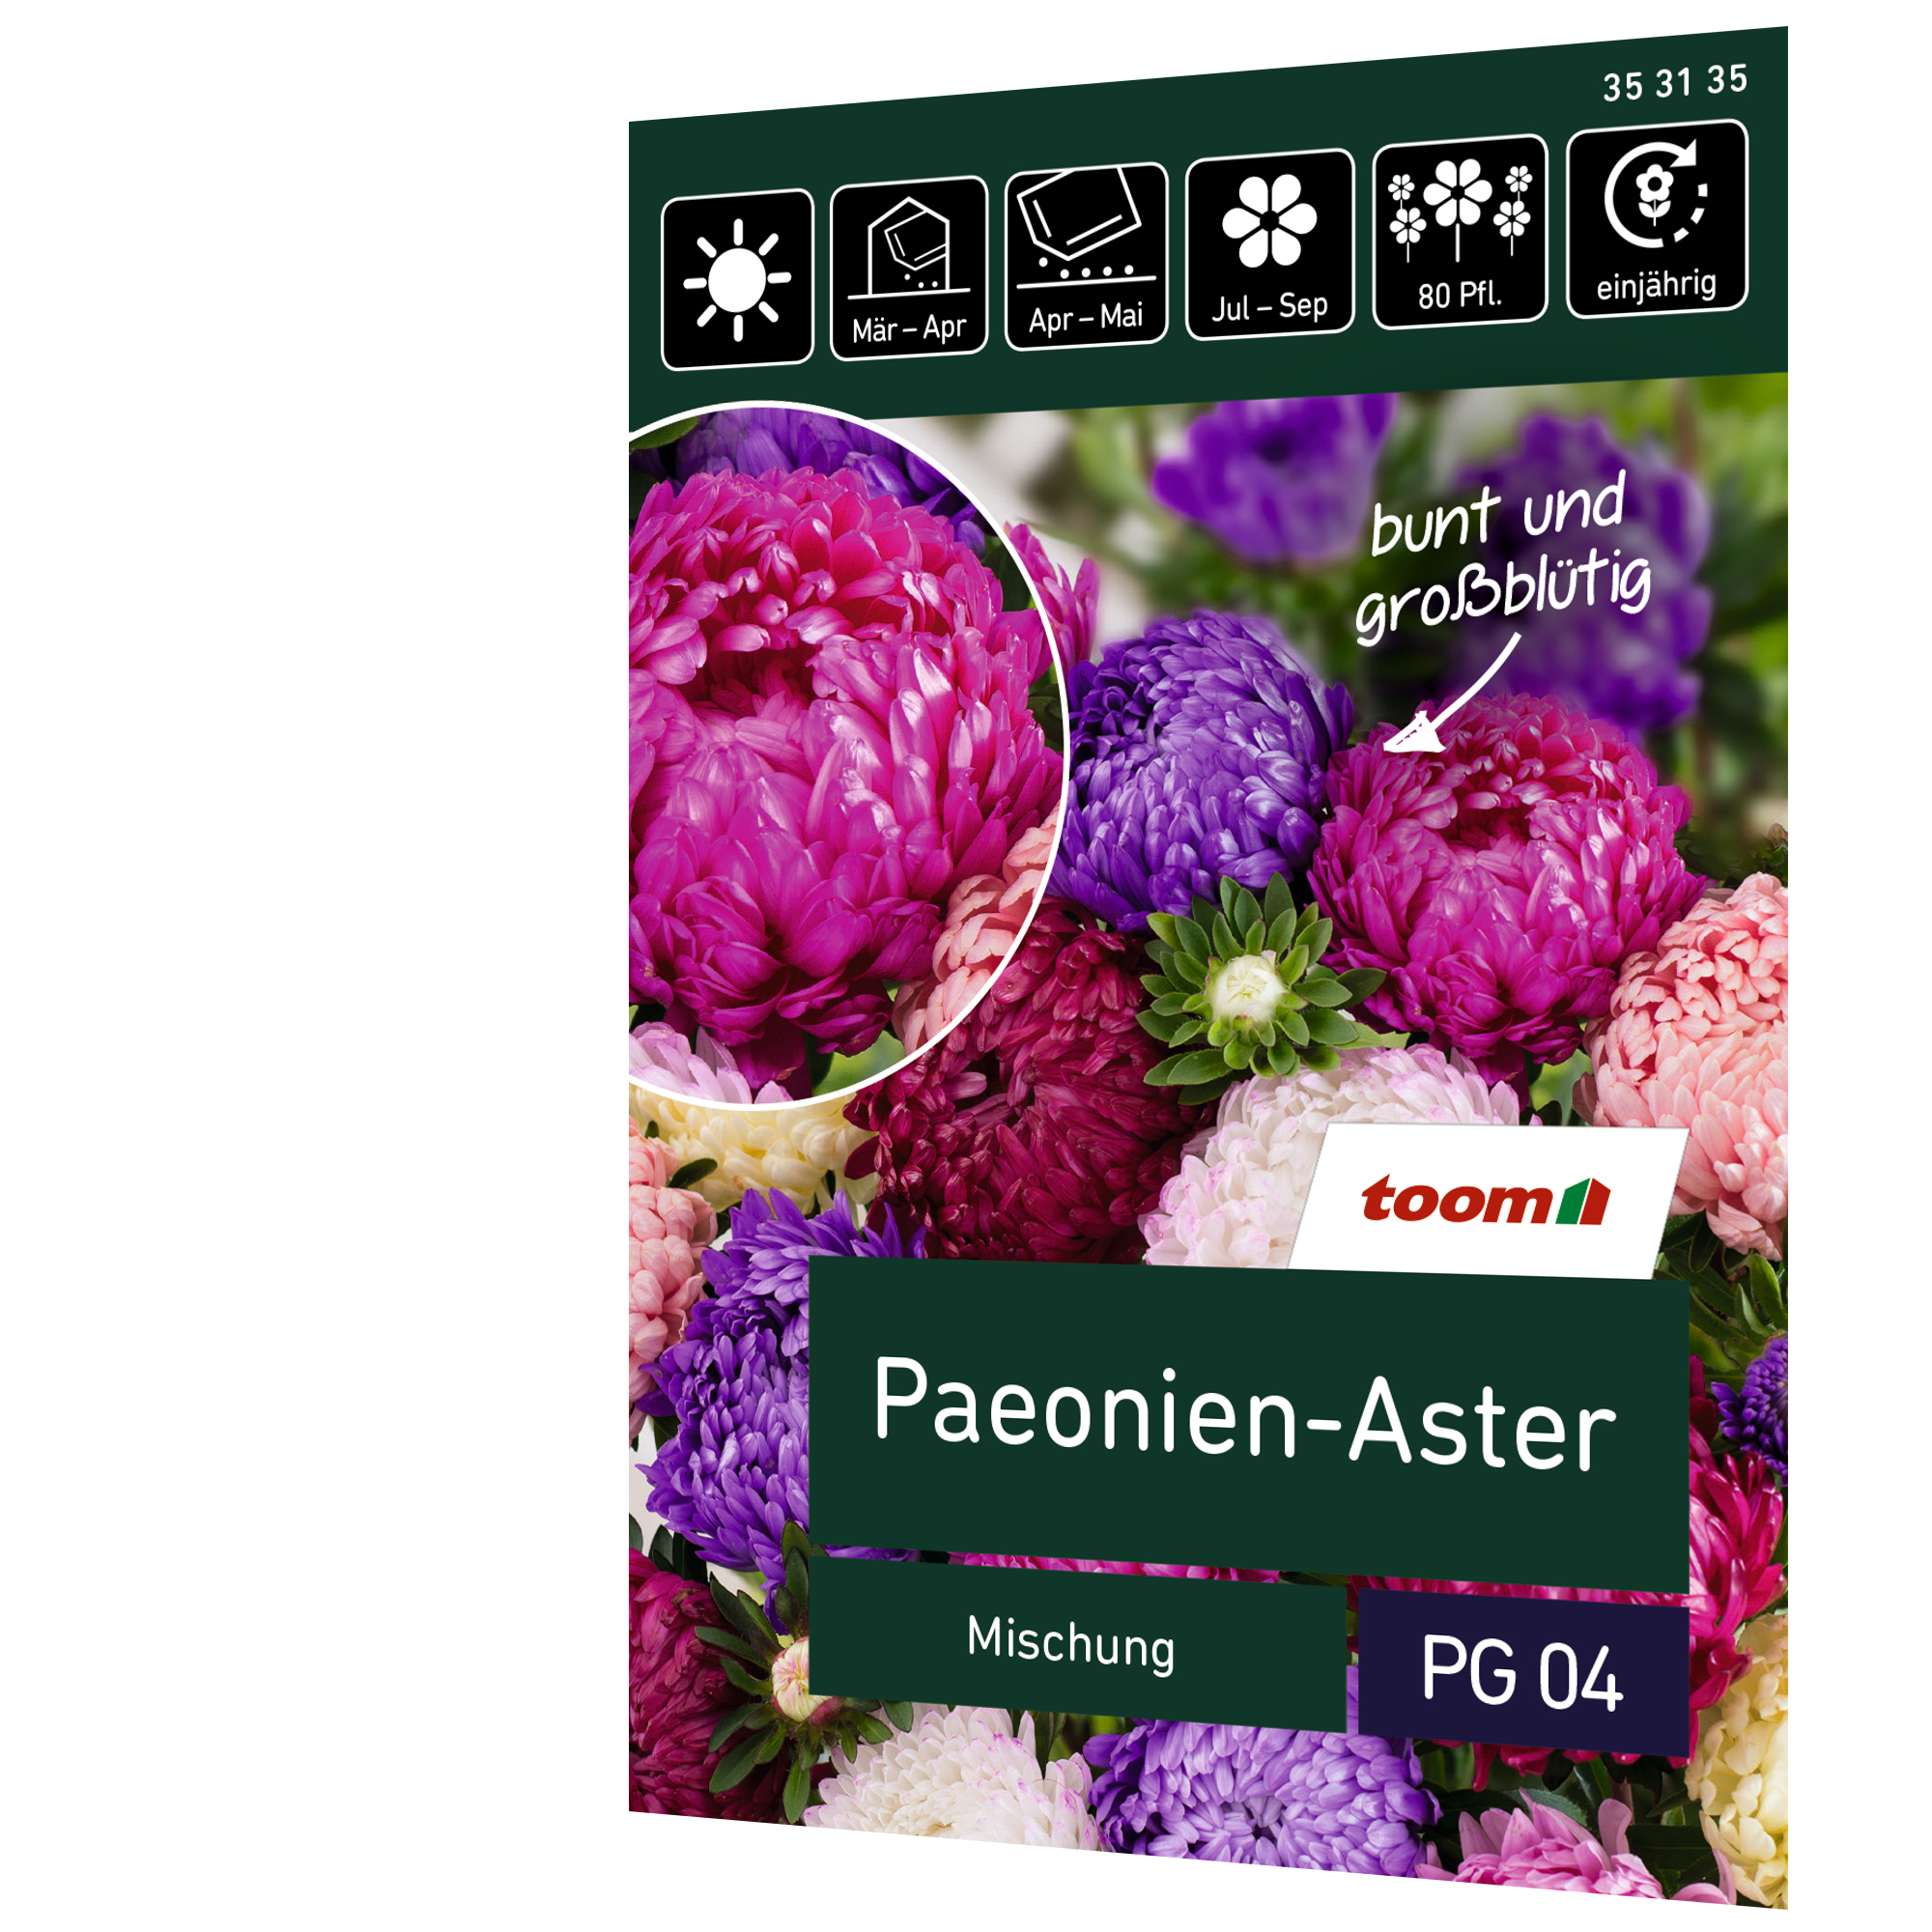 Paeonien-Aster 'Mischung' + product picture